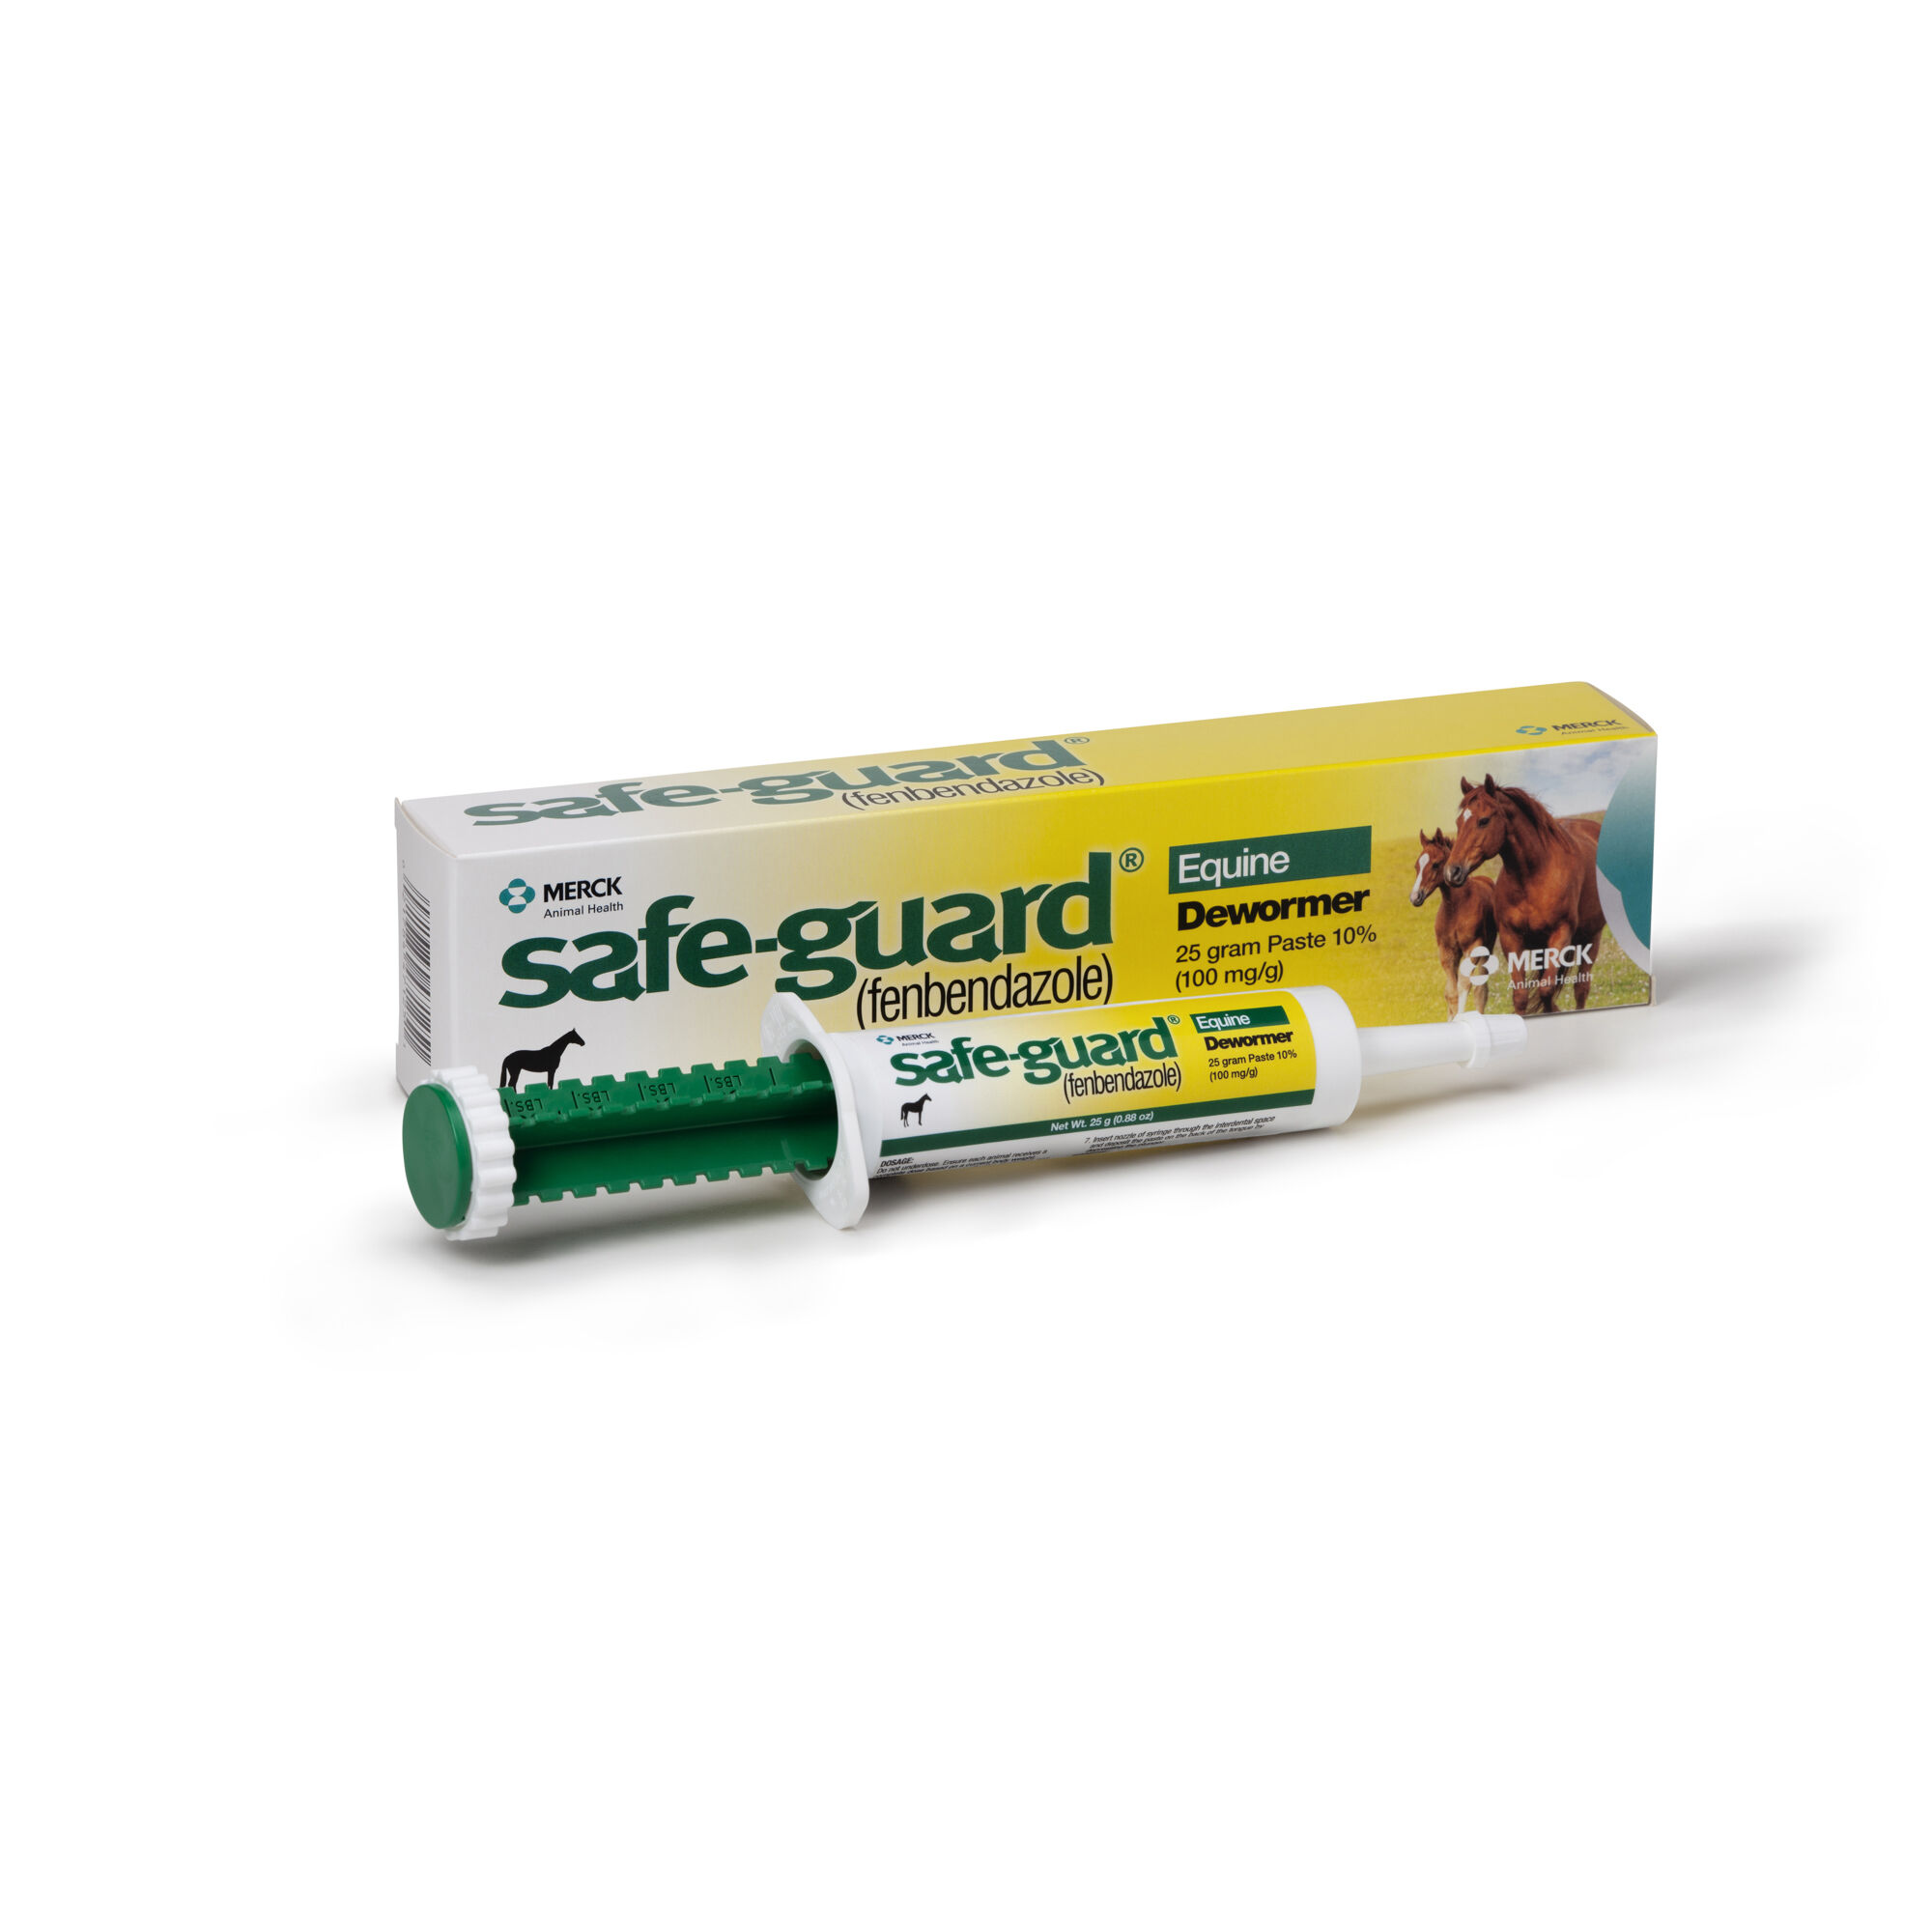 Itch Guard Cream: Buy Online at Best Price in UAE - Amazon.ae